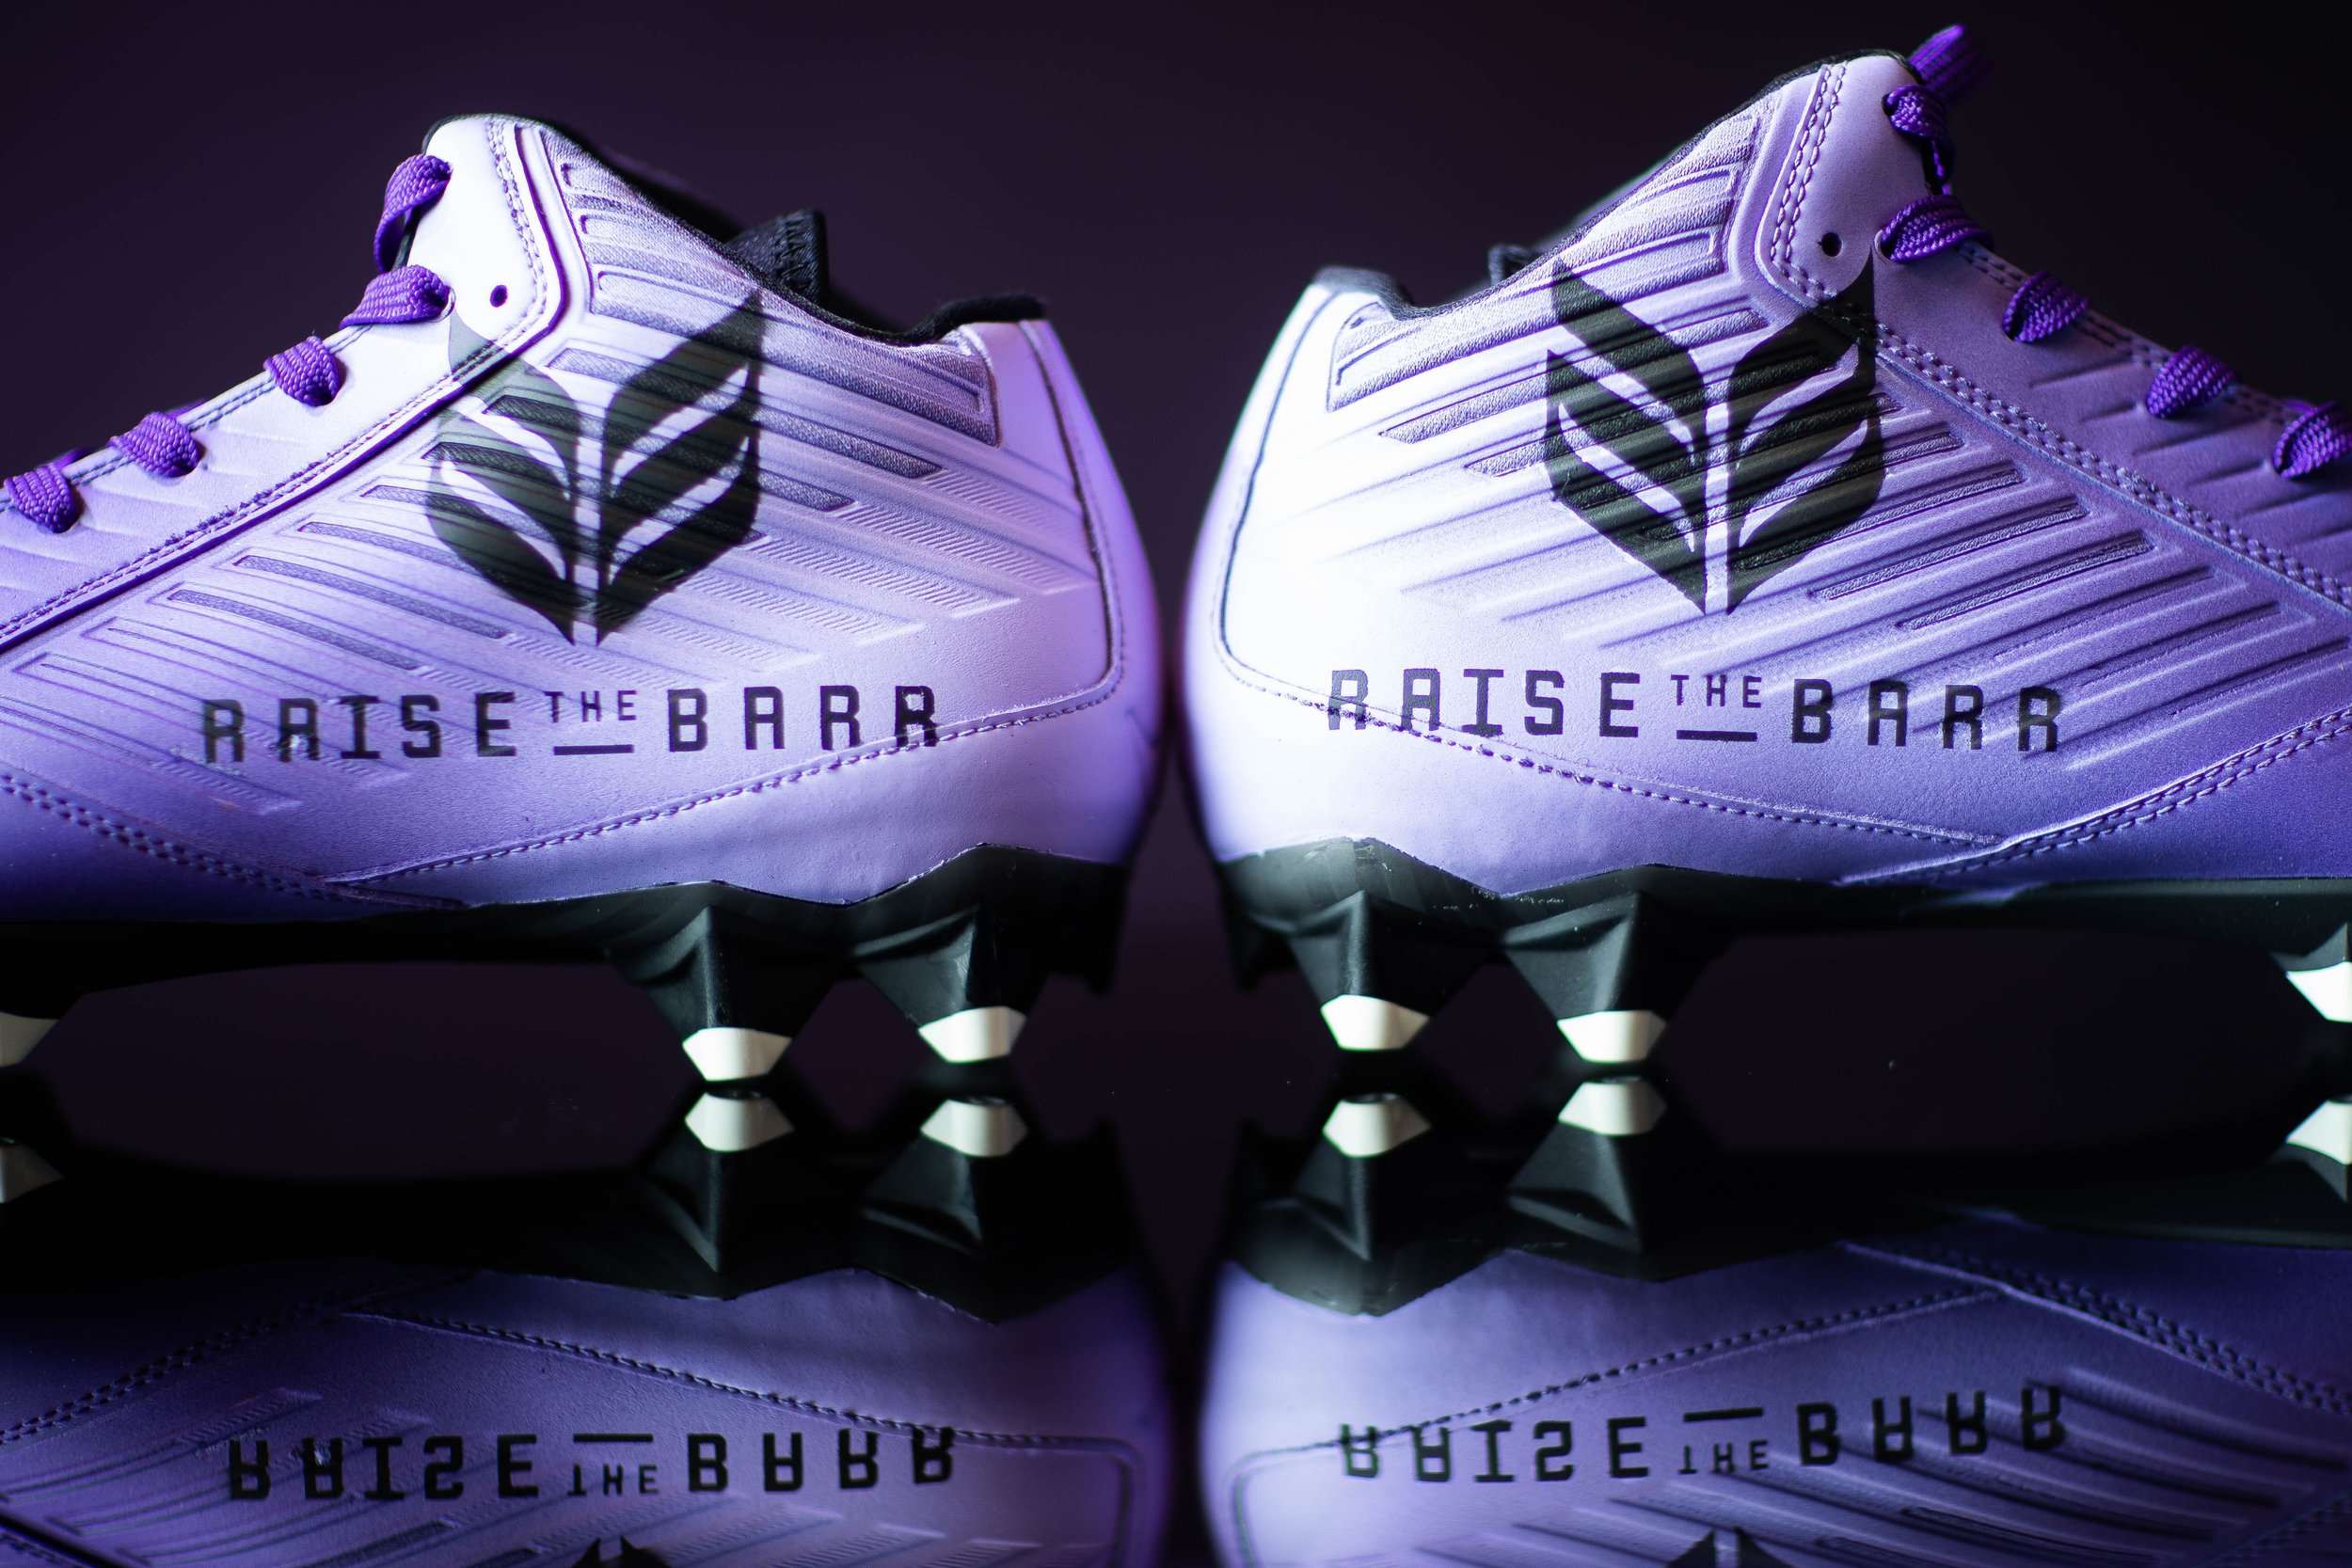  Anthony Barr’s cleats. Charity: Raise The Barr 